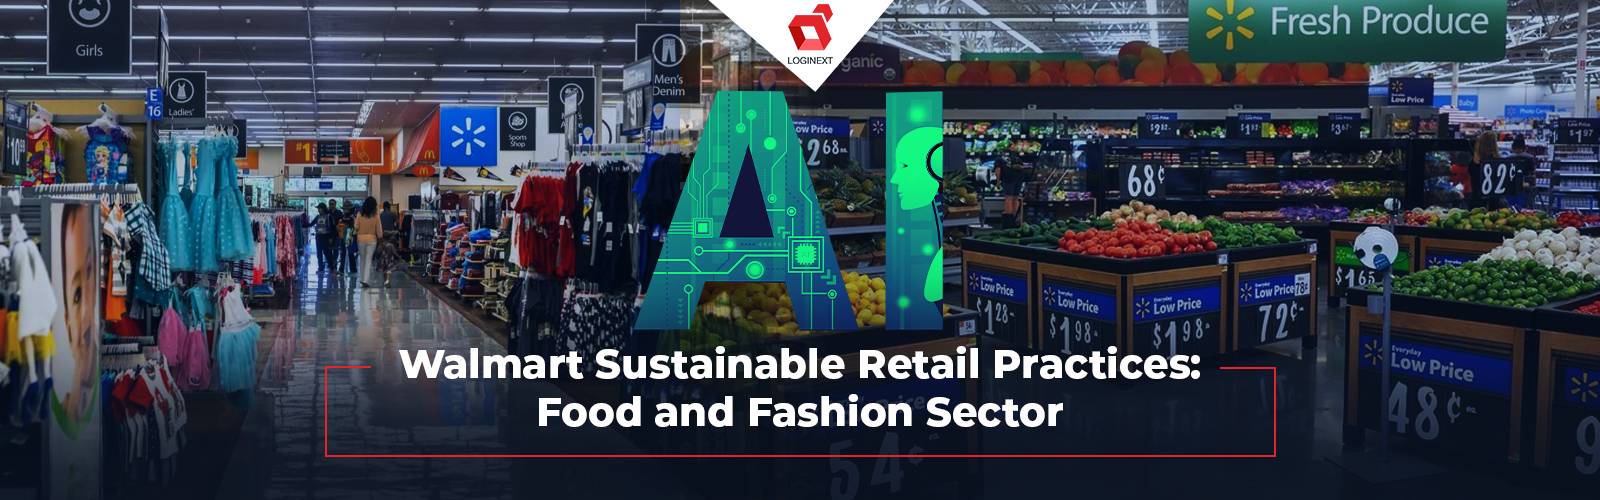 Walmart's AI Technology For Sustainable Food and Fashion Retail